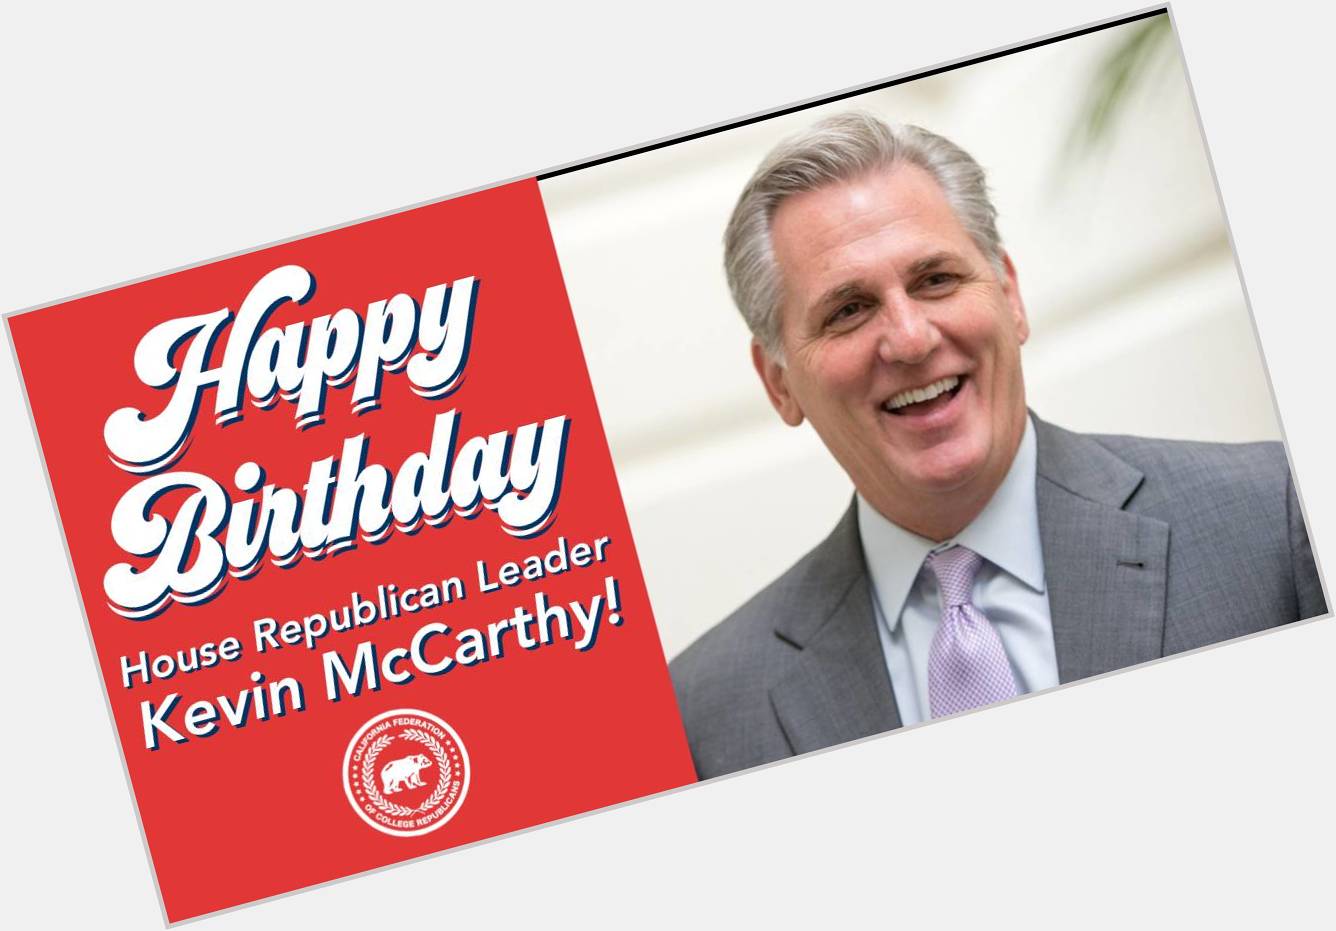 On behalf of College Republicans, we would like to wish Kevin McCarthy a Happy Birthday! 